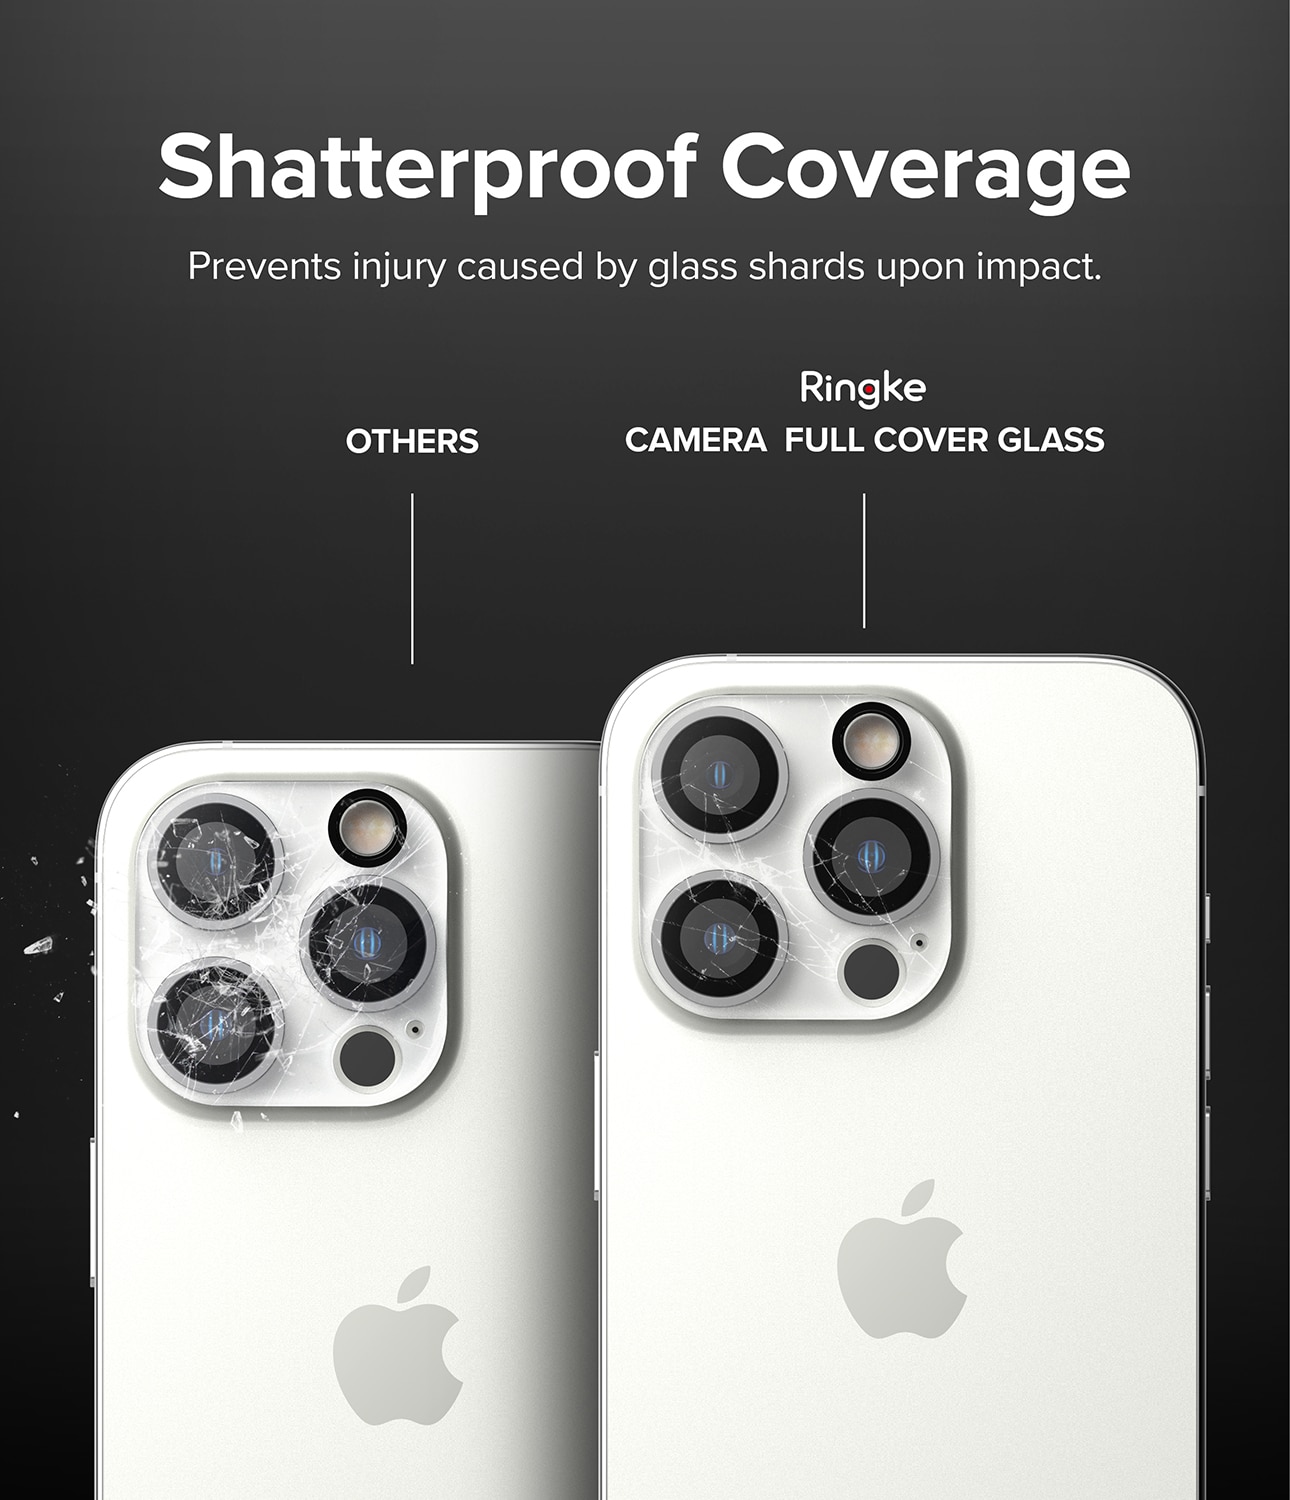 Hoerrye for iPhone 14 Pro Max & 14 Pro Camera Lens Protector - Easy  Install, Case-Friendly, Ultra-Thin, Military-Grade Protection for Clear  Photos 